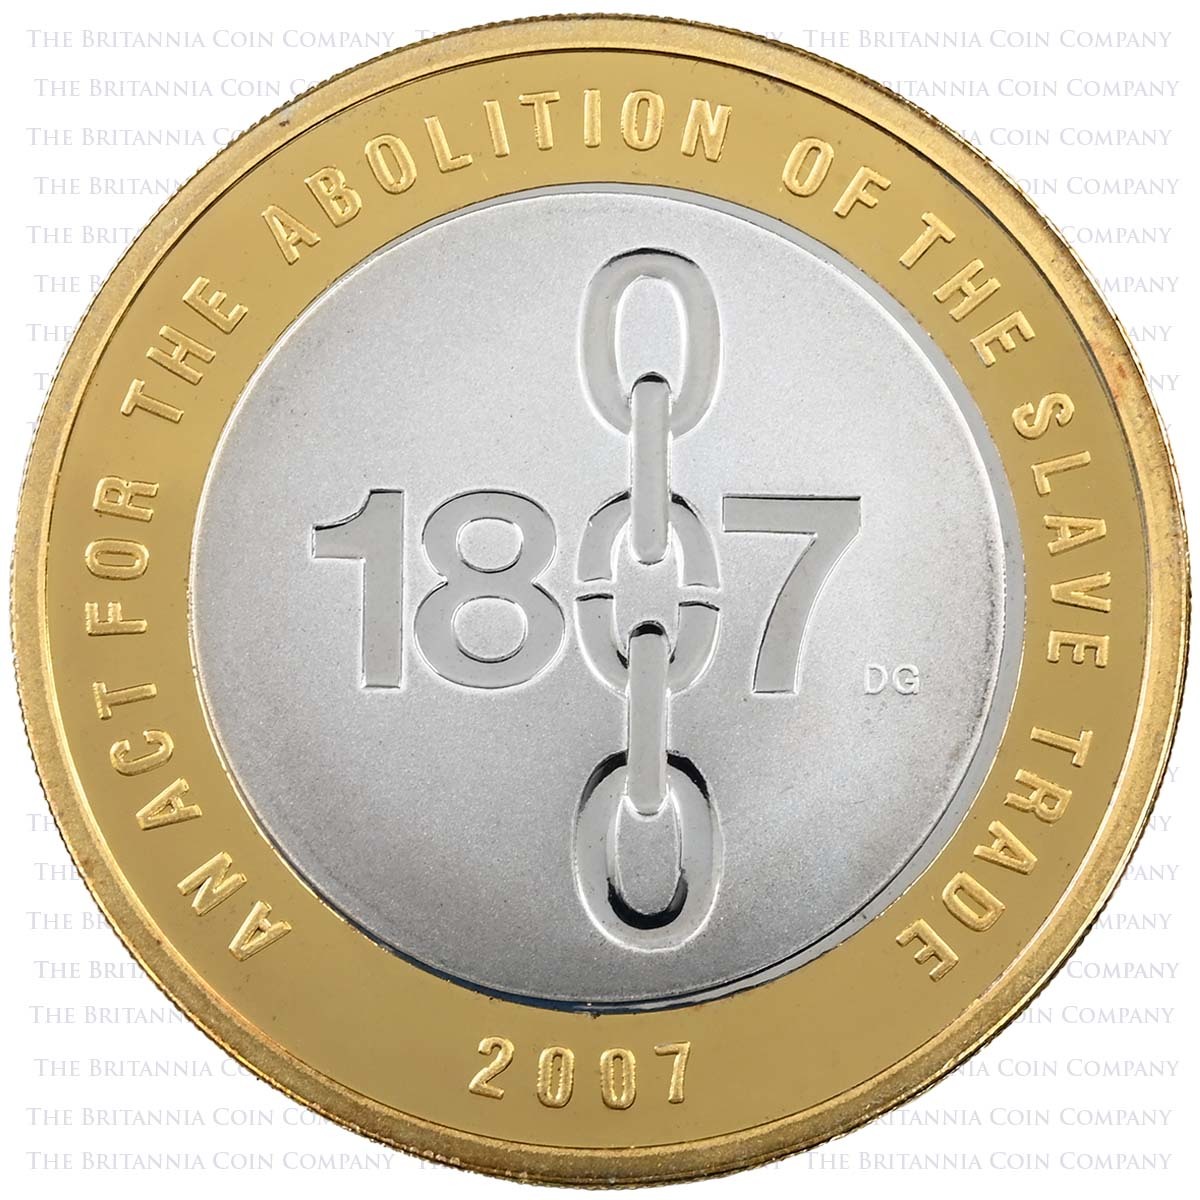 UKASTPF 2007 Abolition of the Slave Trade £2 Piedfort Silver Proof Reverse